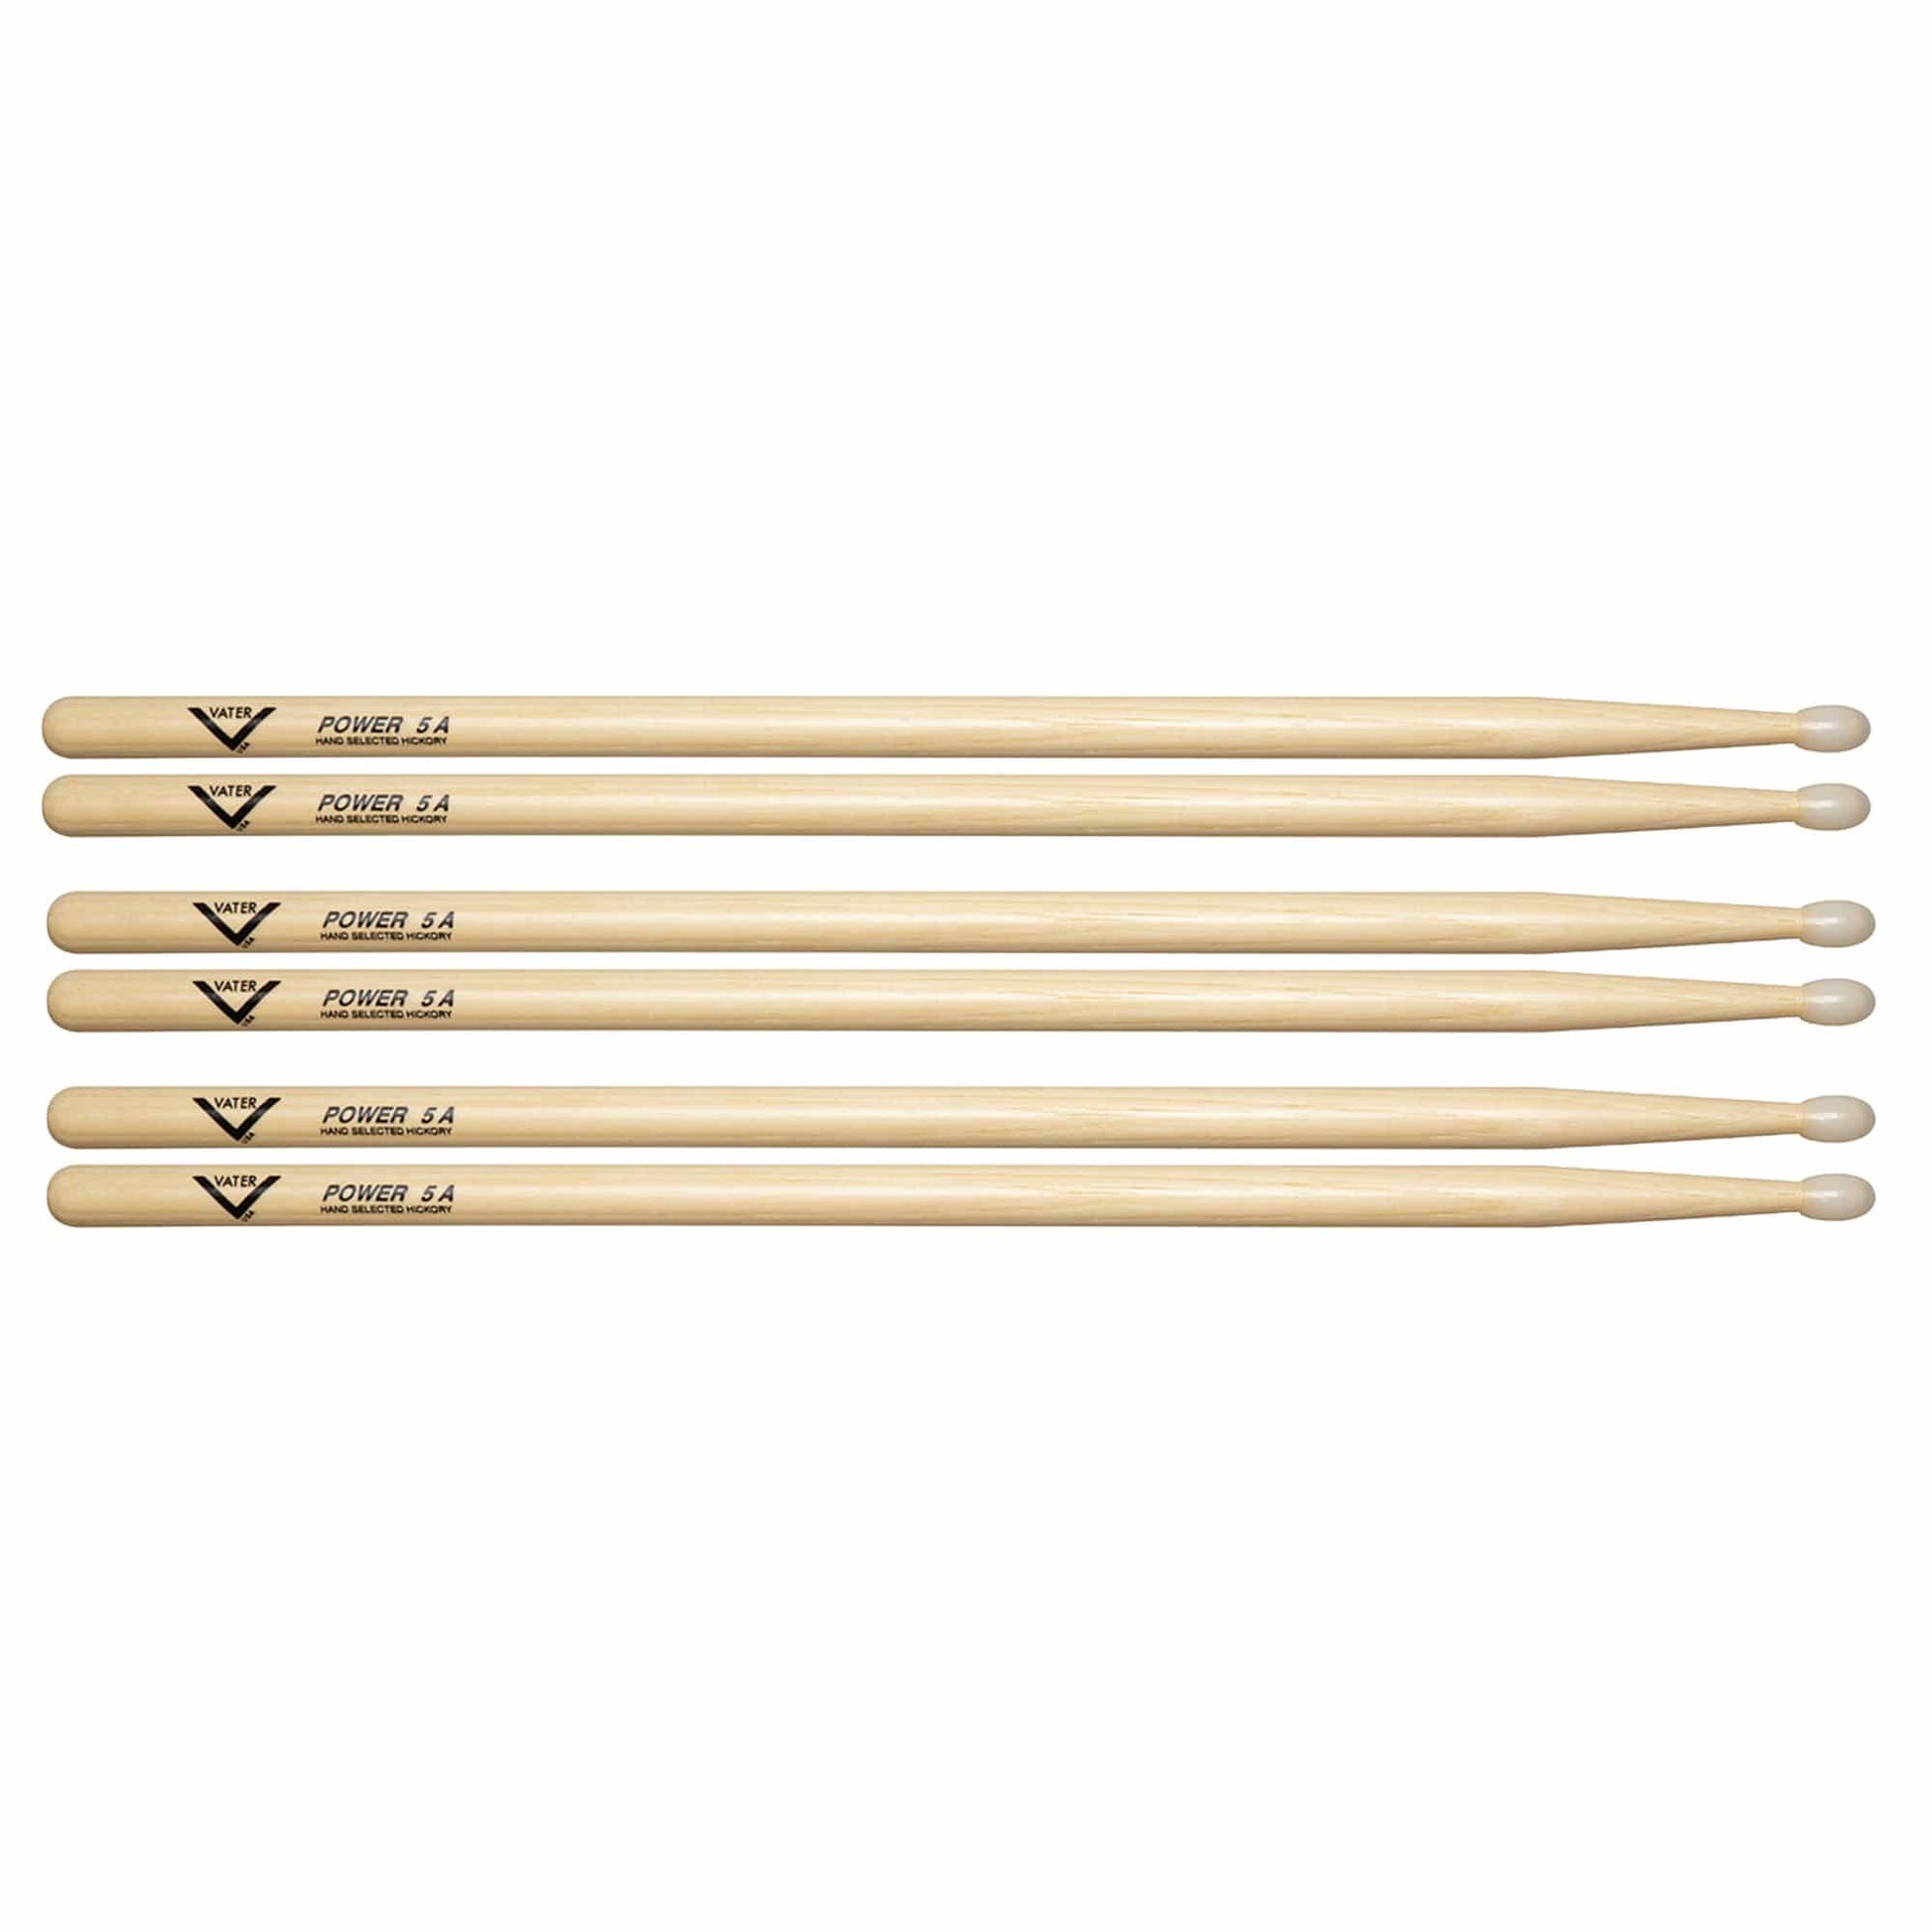 Vater Hickory Power 5A Nylon Tip Drum Sticks (3 Pair Bundle) Drums and Percussion / Parts and Accessories / Drum Sticks and Mallets